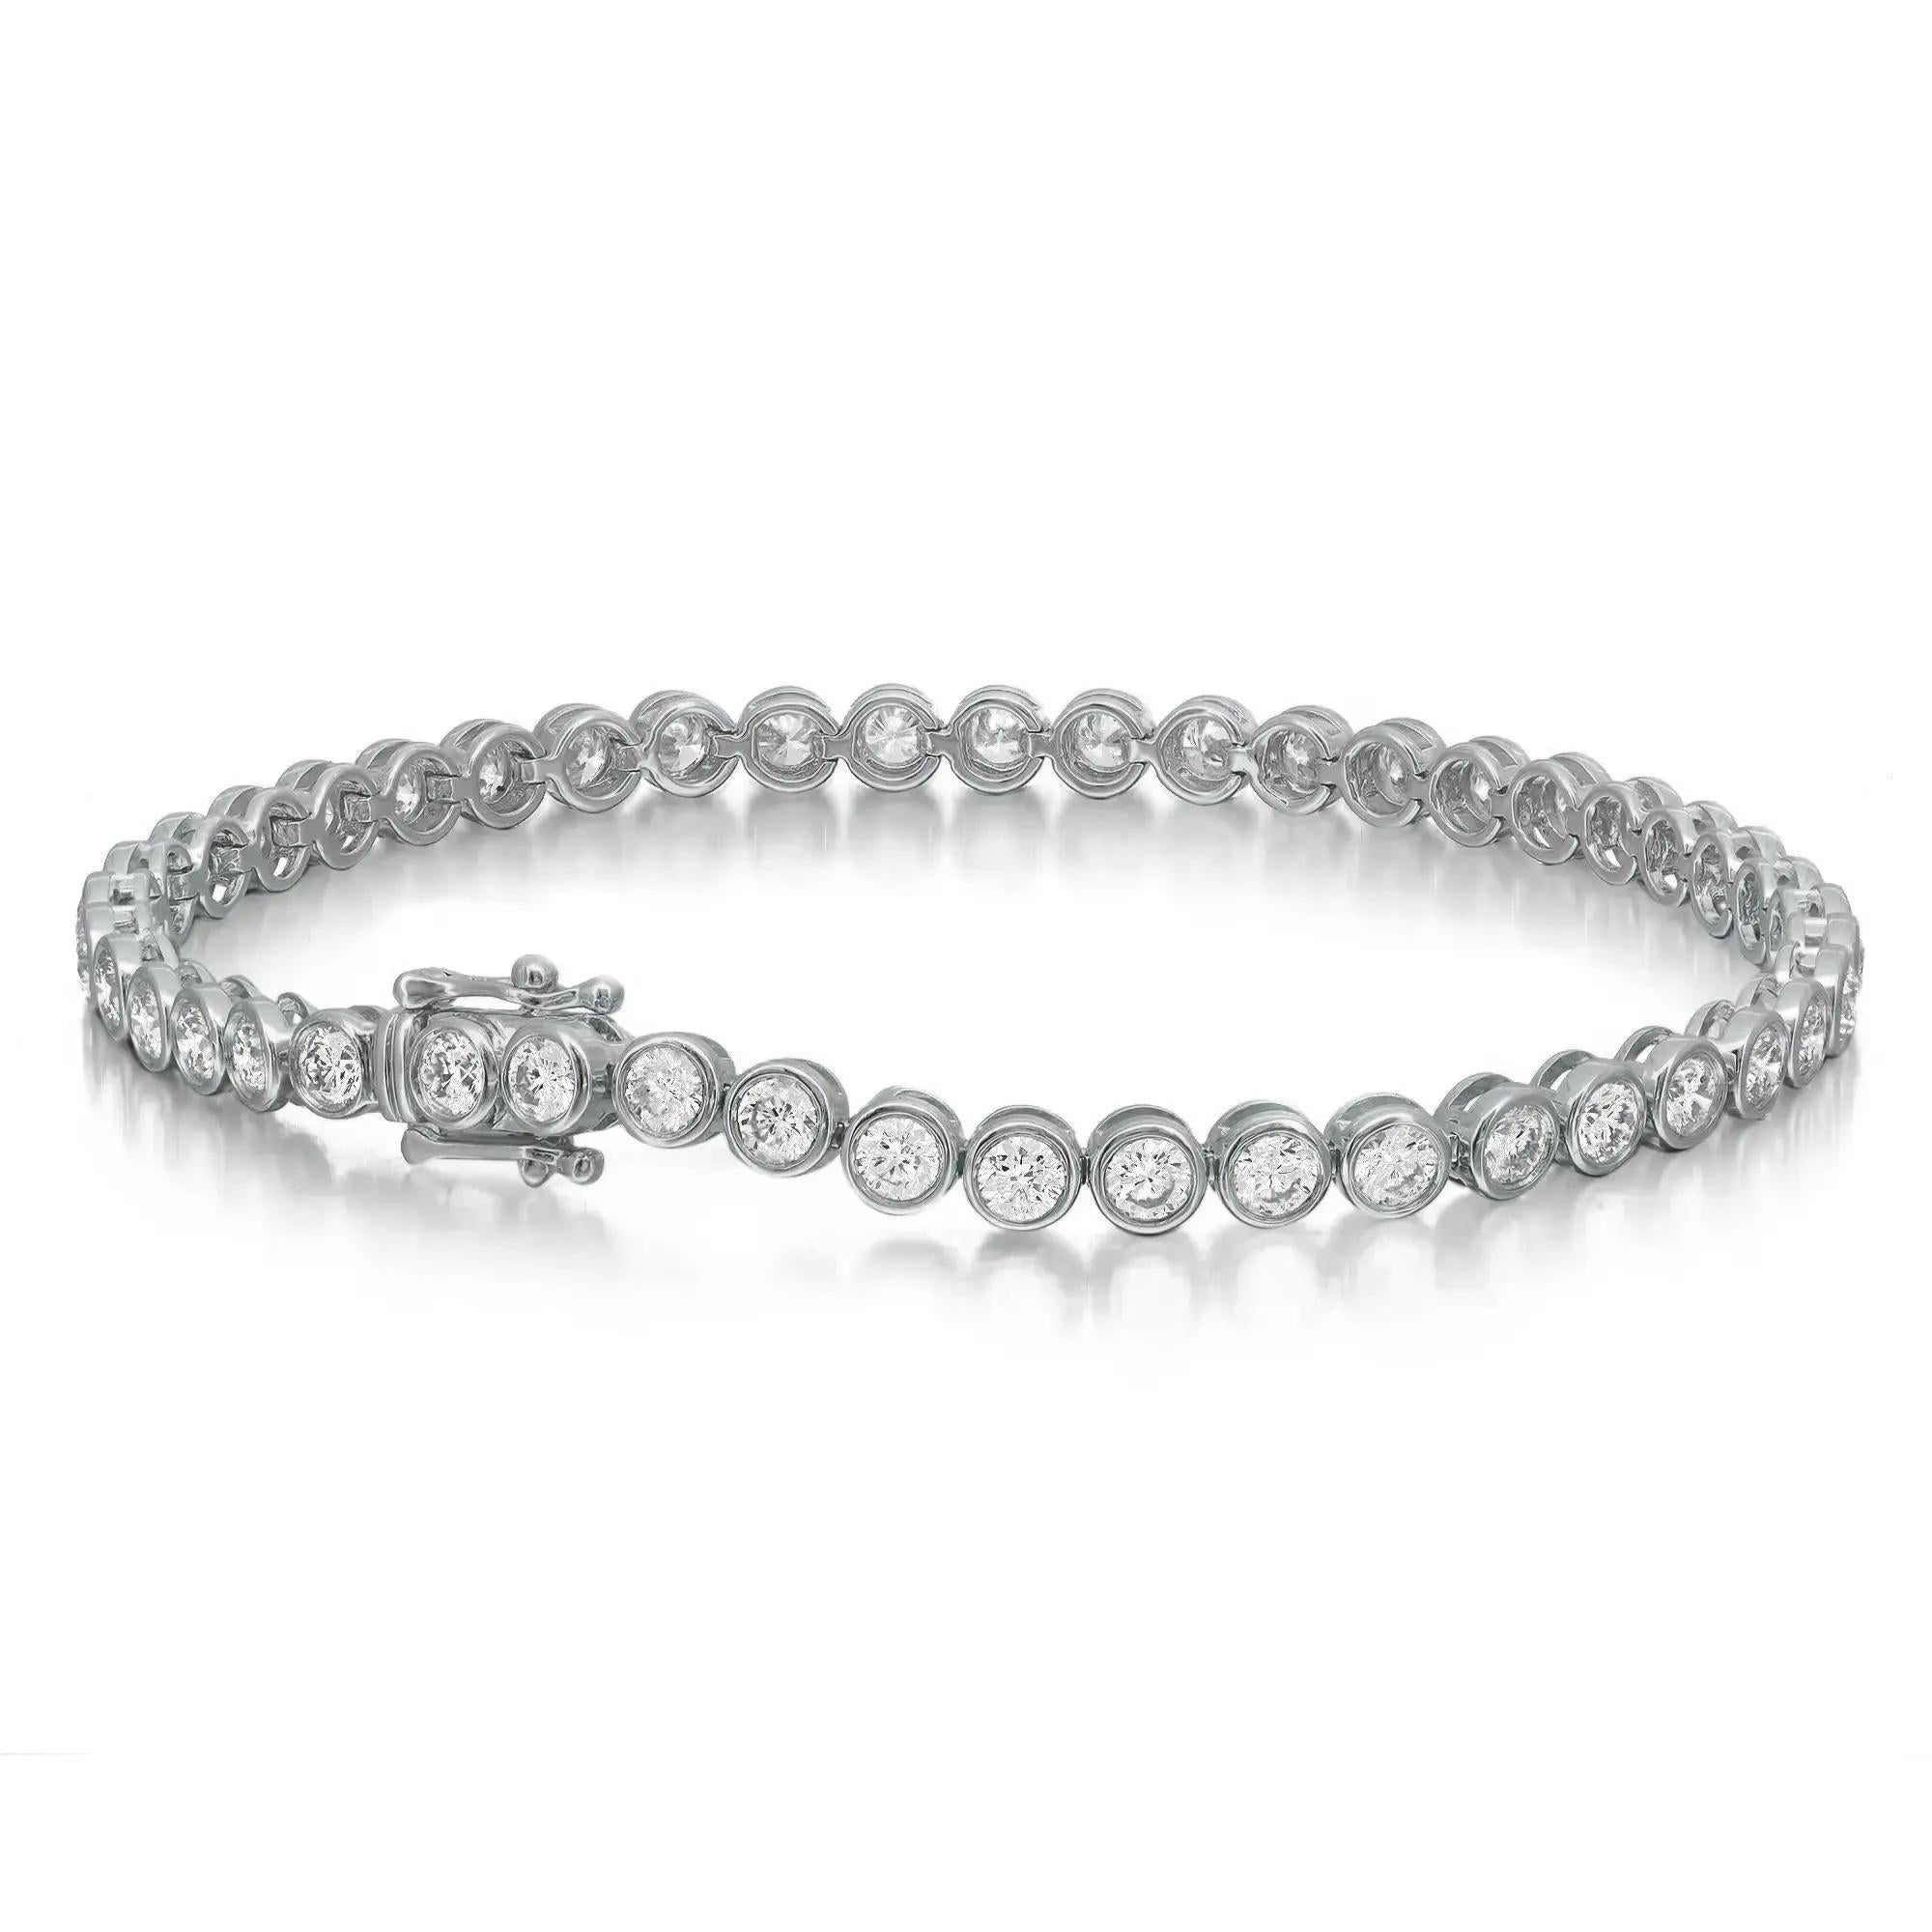 This exquisite Rachael Koen tennis bracelet features round brilliant cut diamonds in bezel setting style crafted in 18k white gold. Lightweight and super stackable, this handmade modern creation is a great addition to your jewelry collection. This